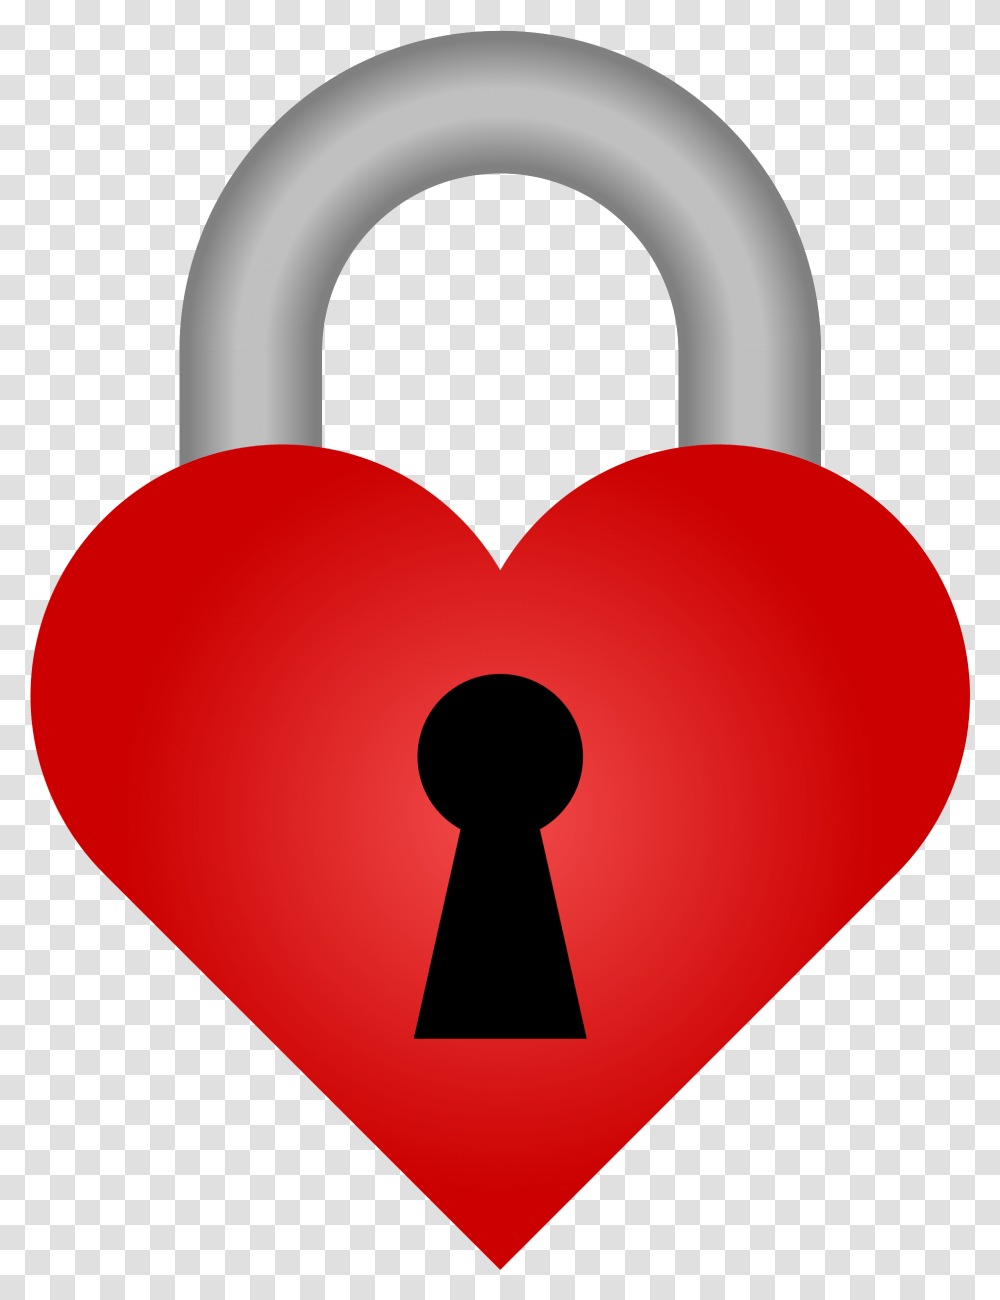 Download Graphic Free Heart Shaped Padlock Heart, Balloon, Security, Combination Lock Transparent Png